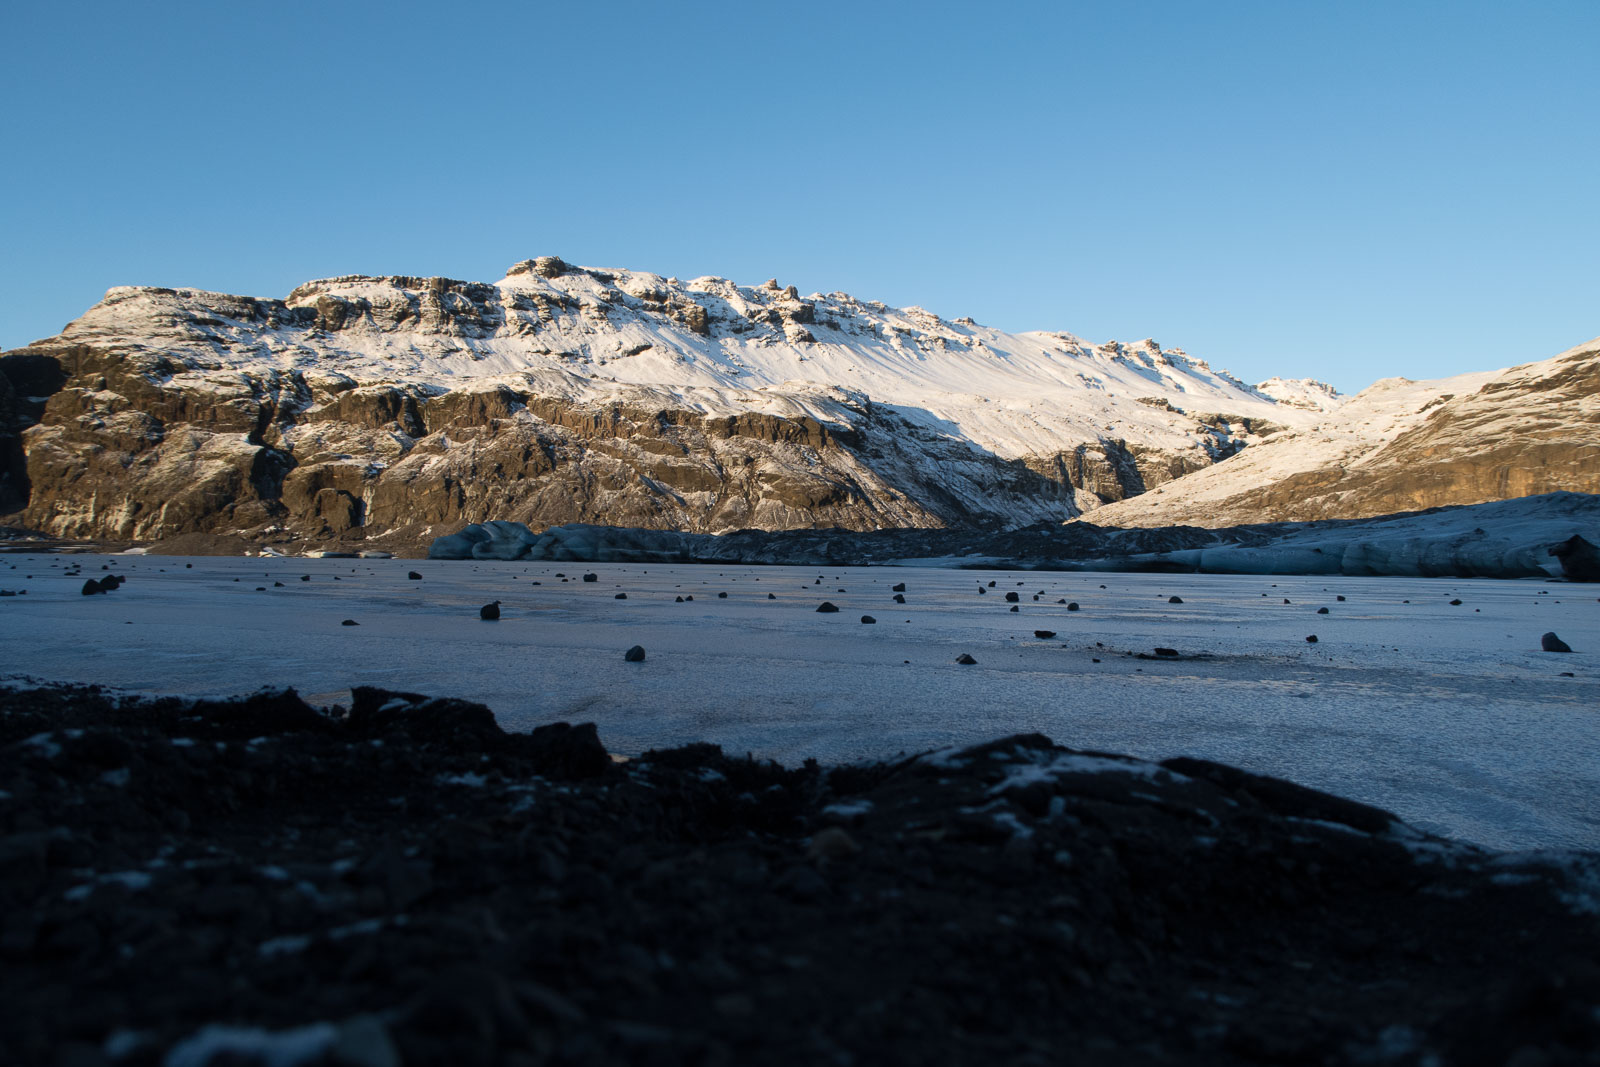 The frozen landscape and mountainous backdrop in Iceland.